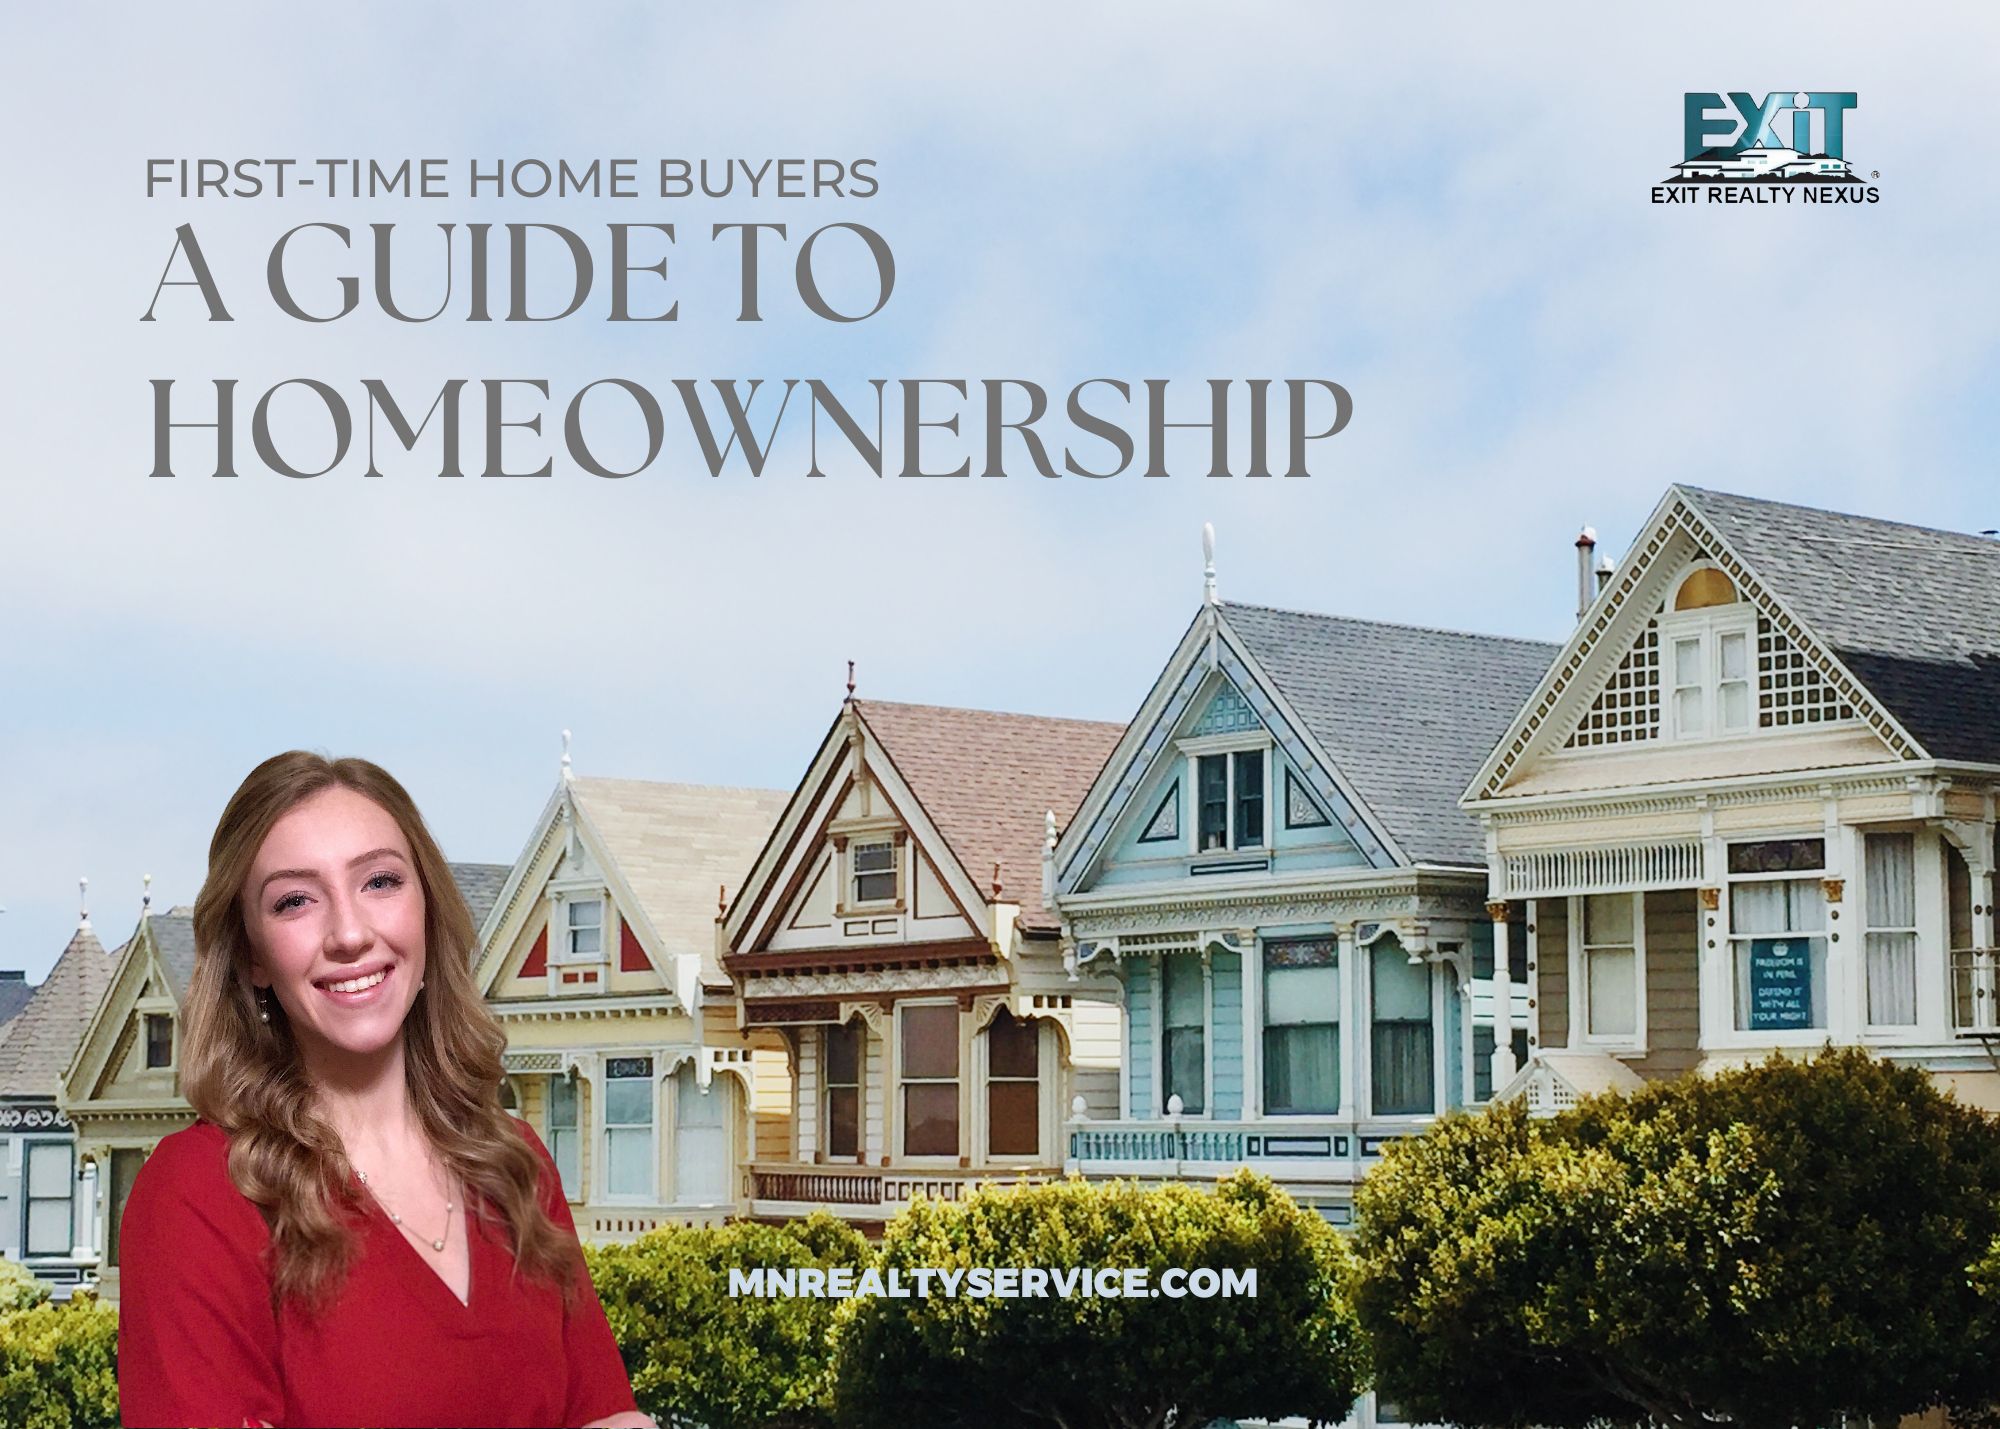 First Time Home-Buyers: Guide to Homeownership